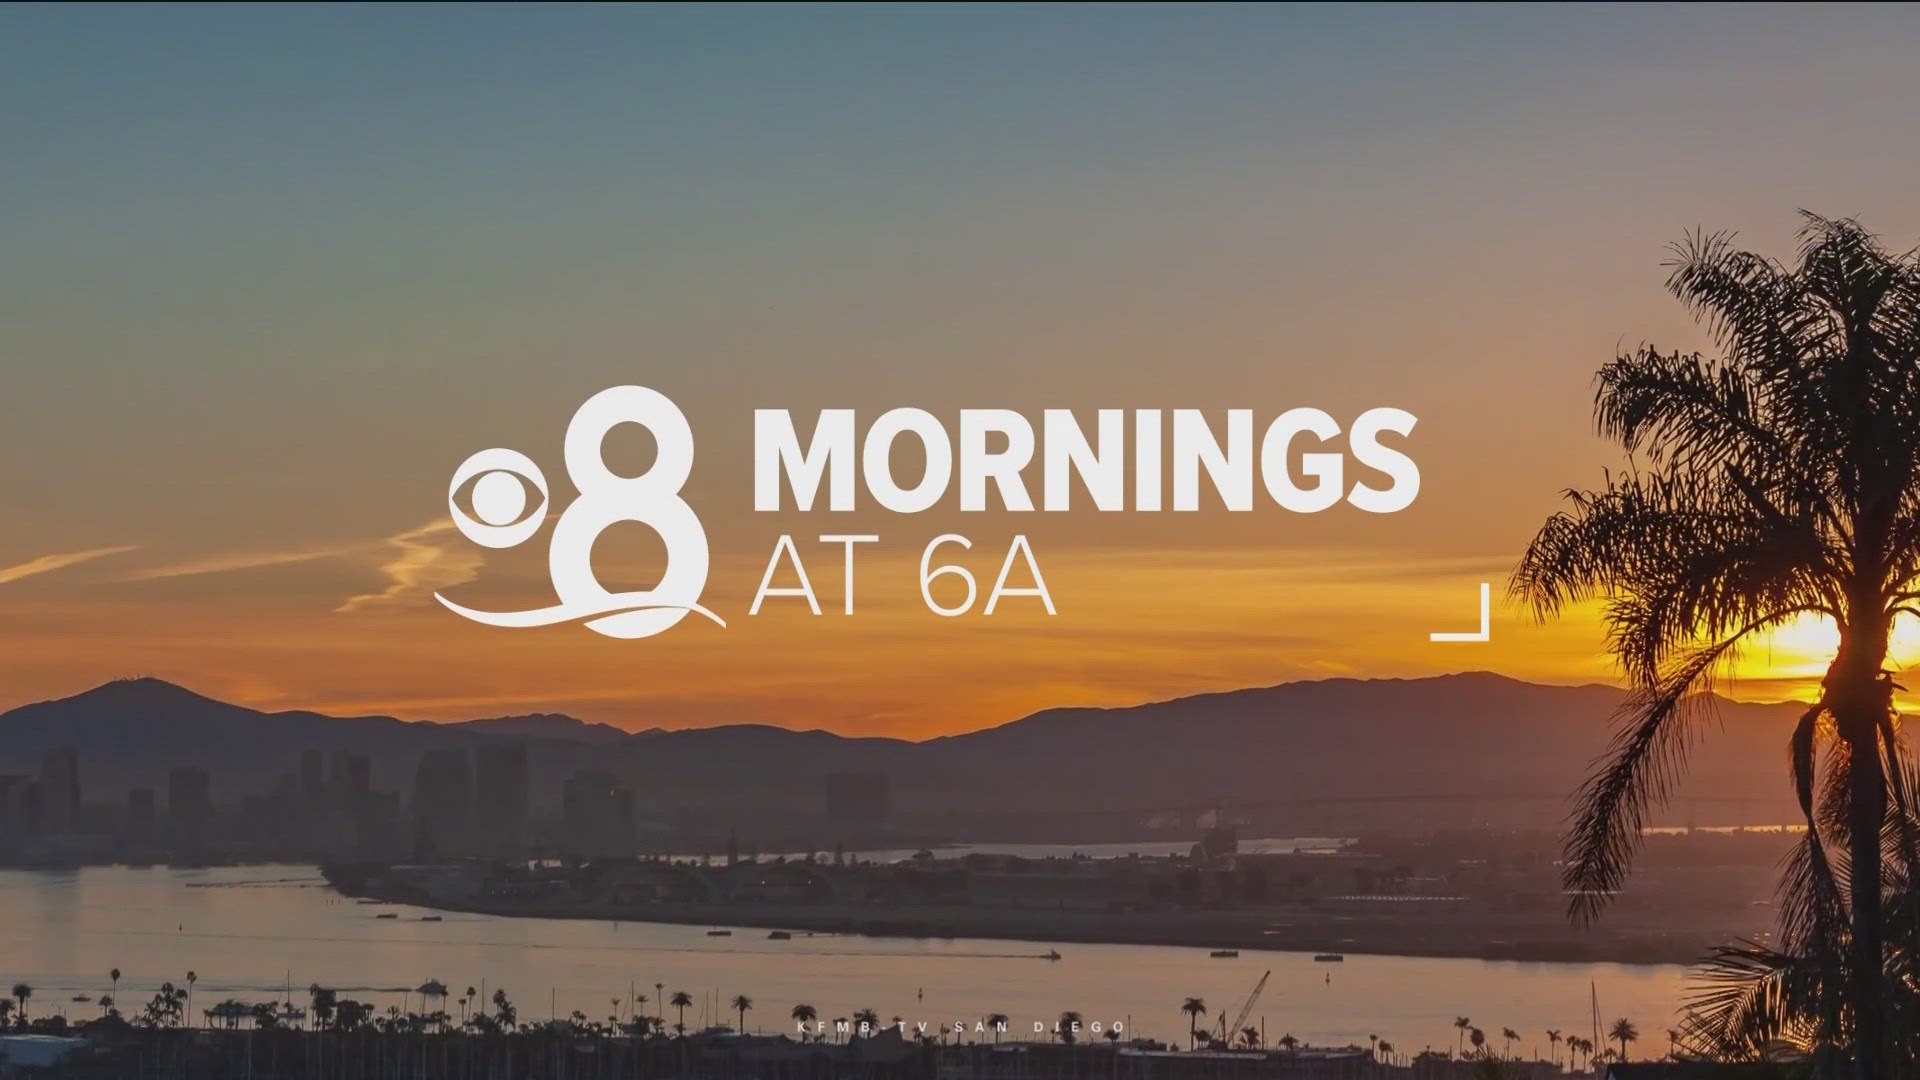 Here are the top stories around San Diego County for the morning of Thursday, April 25.
For the latest news, weather and sports, head to:
https://www.cbs8.com/